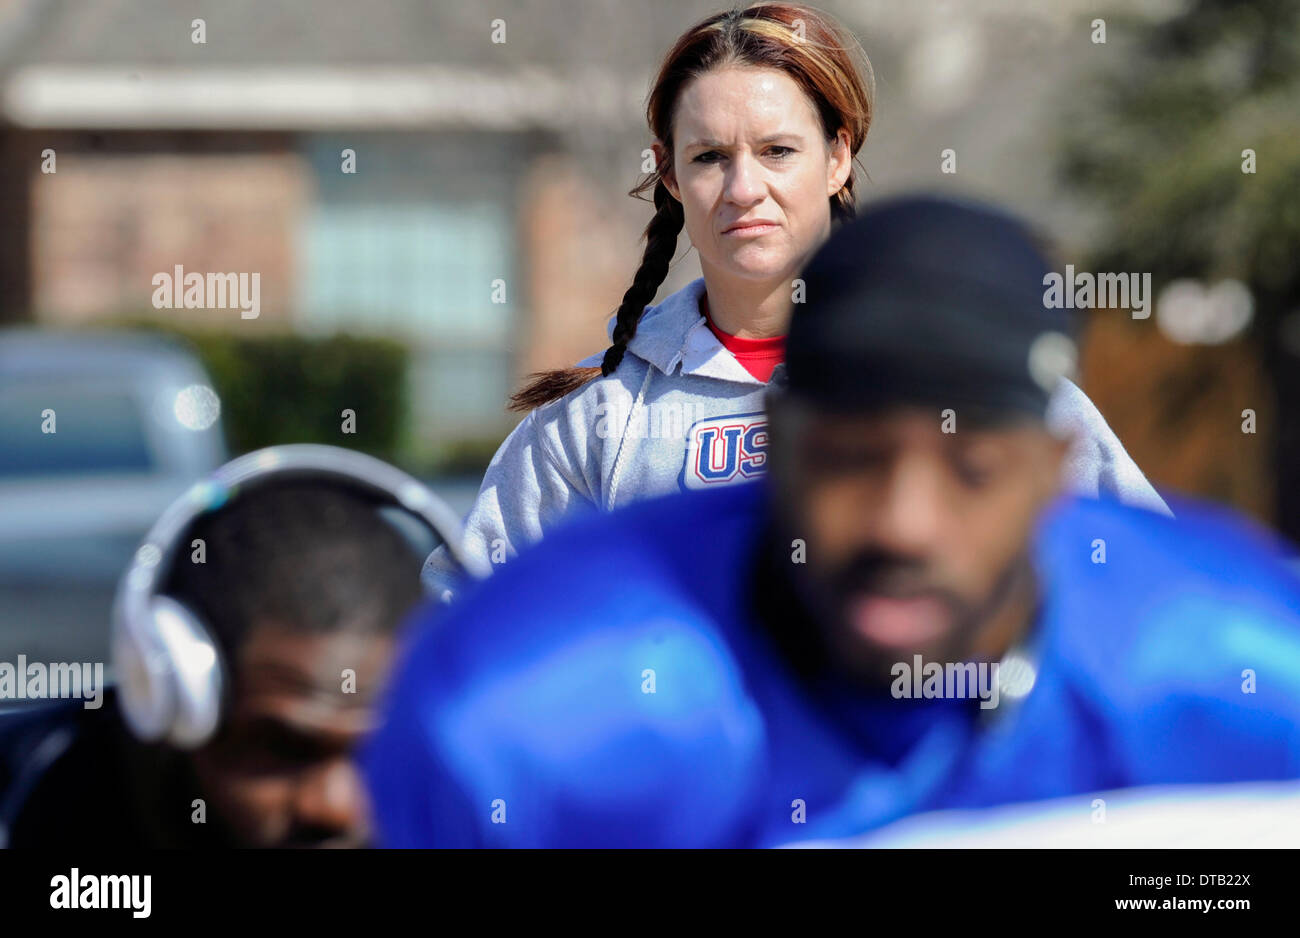 Feb. 13, 2014 - Allen, TX, United States of America - Jennifer Welter waits for her turn to participate in a drill during practice Thursday, February 13, 2014, in Allen, Texas. The 5-foot-2-inch, 130 pound Welter is the first woman to try out for a professional football team at a position other than kicker, she is trying to make the Texas Revolution of the Arena Football League, as a running back. Stock Photo